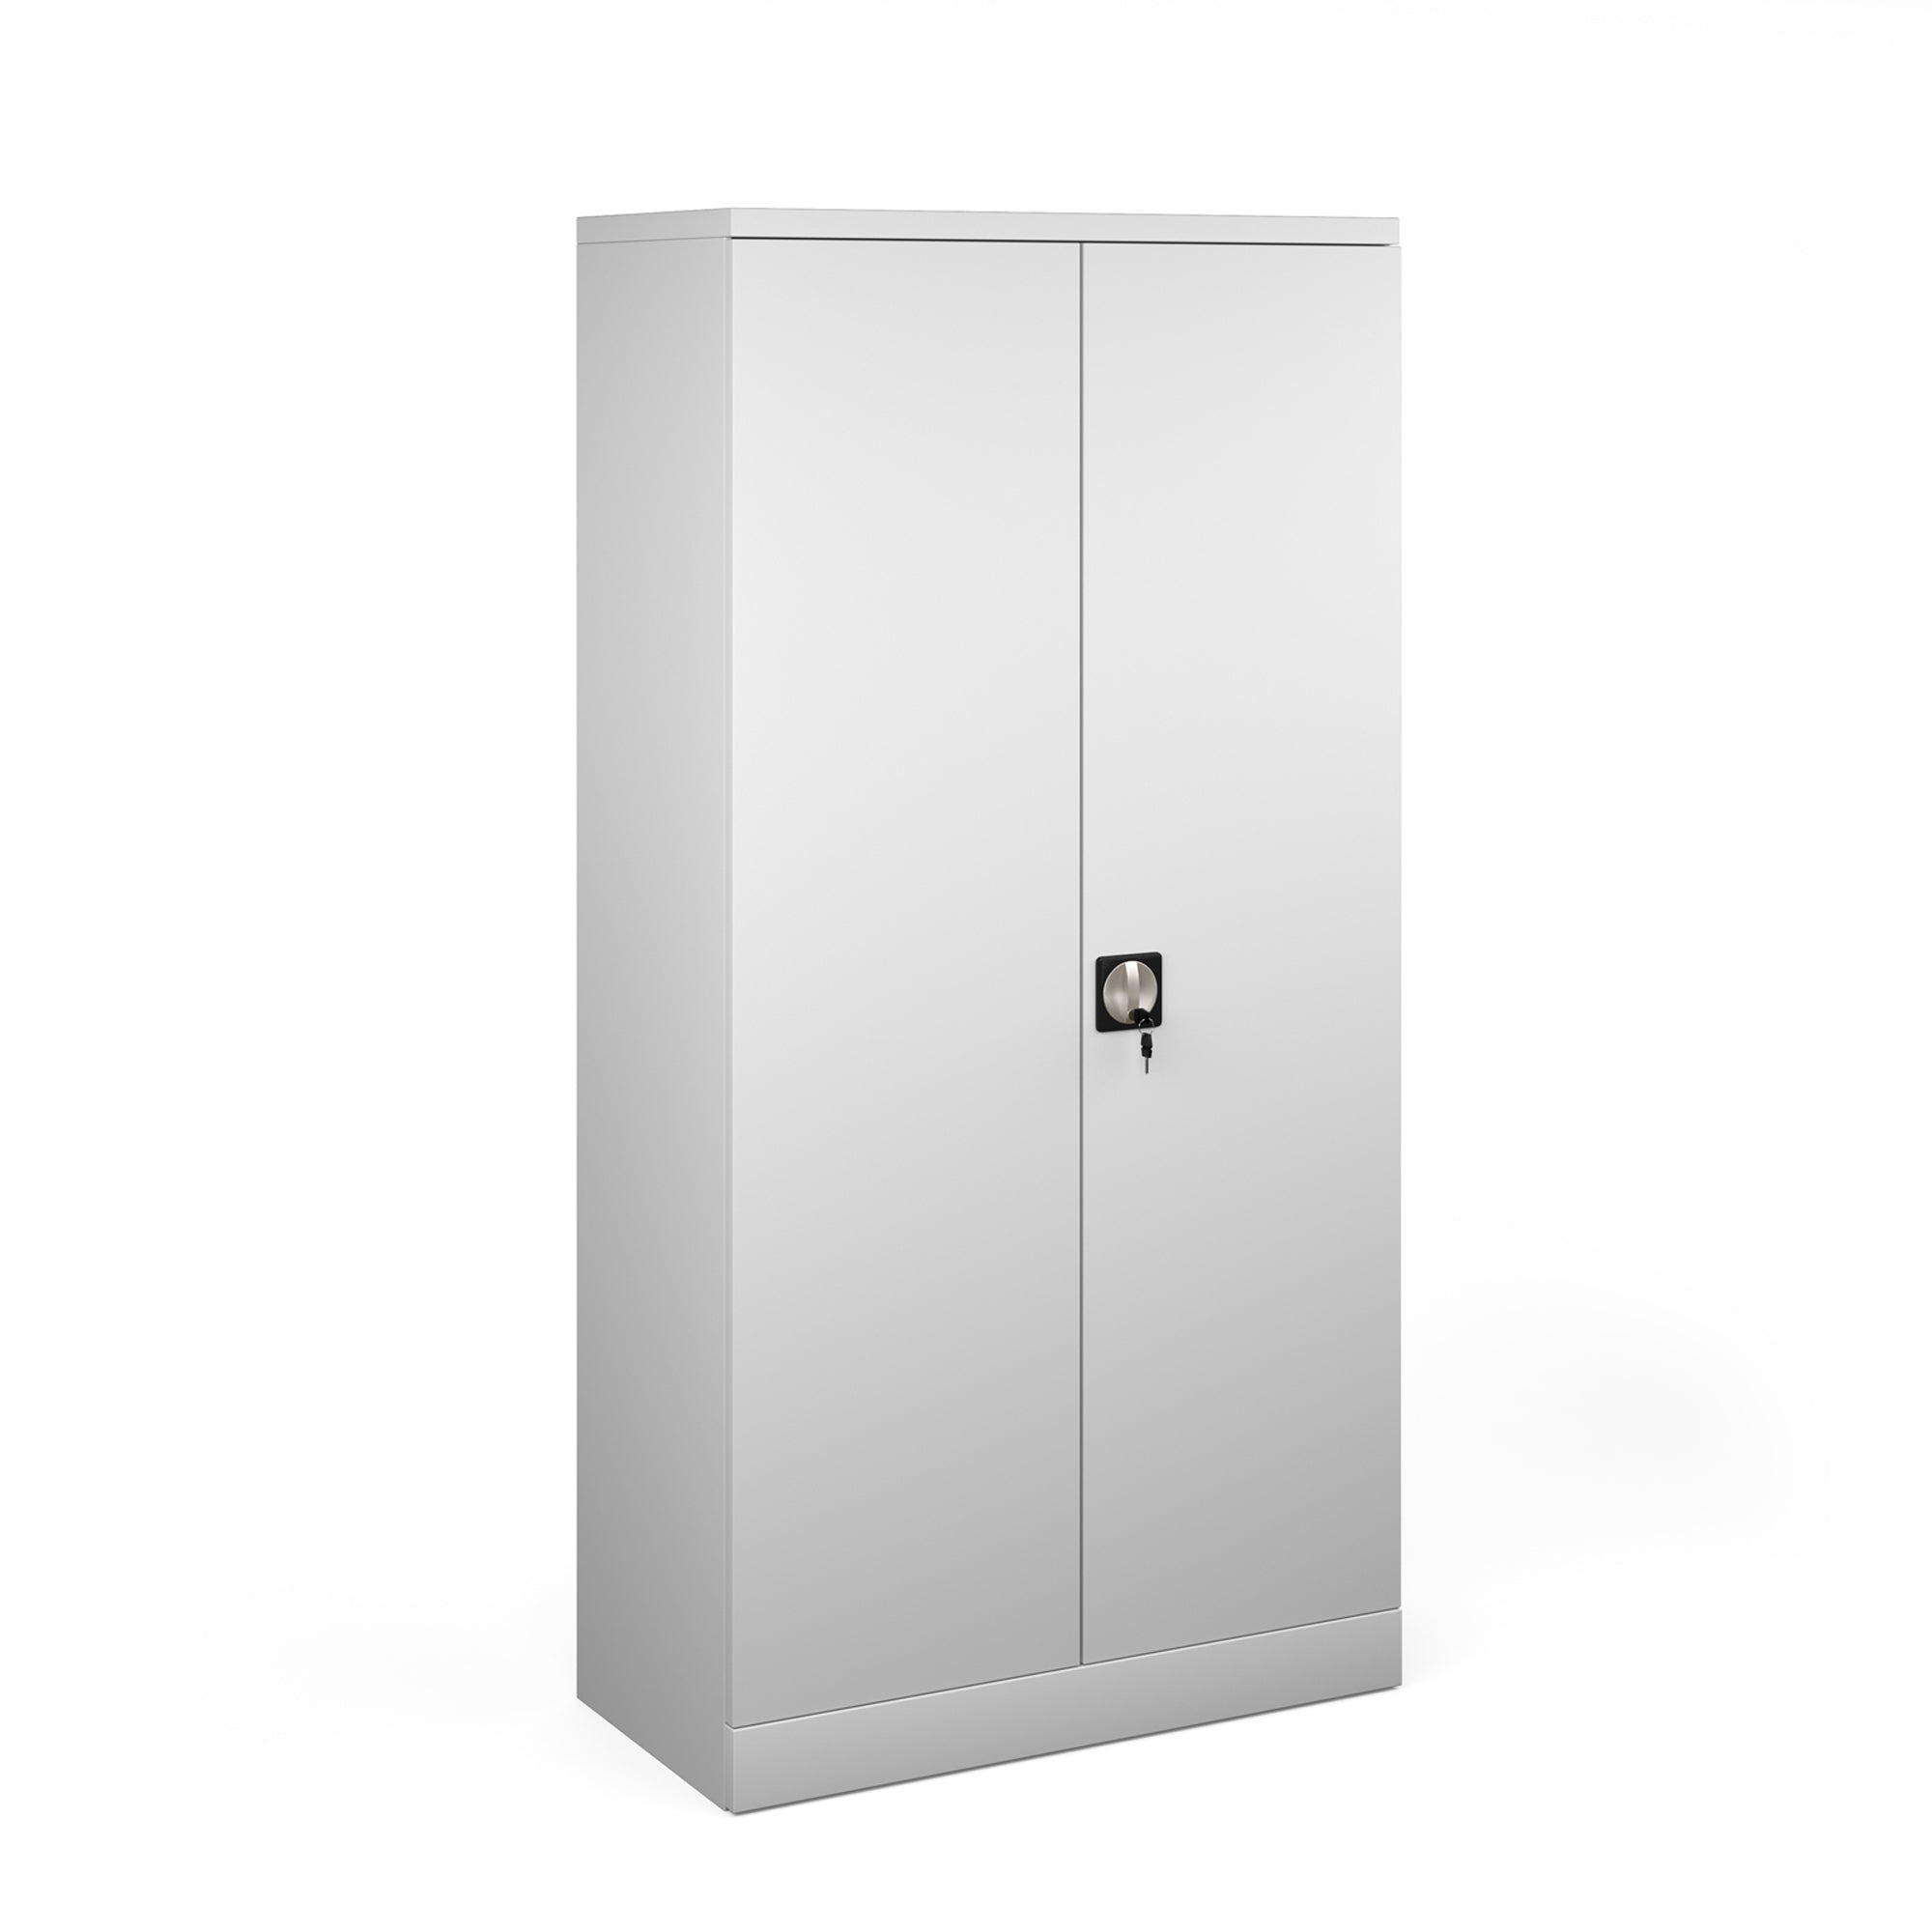 Steel contract cupboard with 3 shelves 1830mm high - light grey - Office Products Online